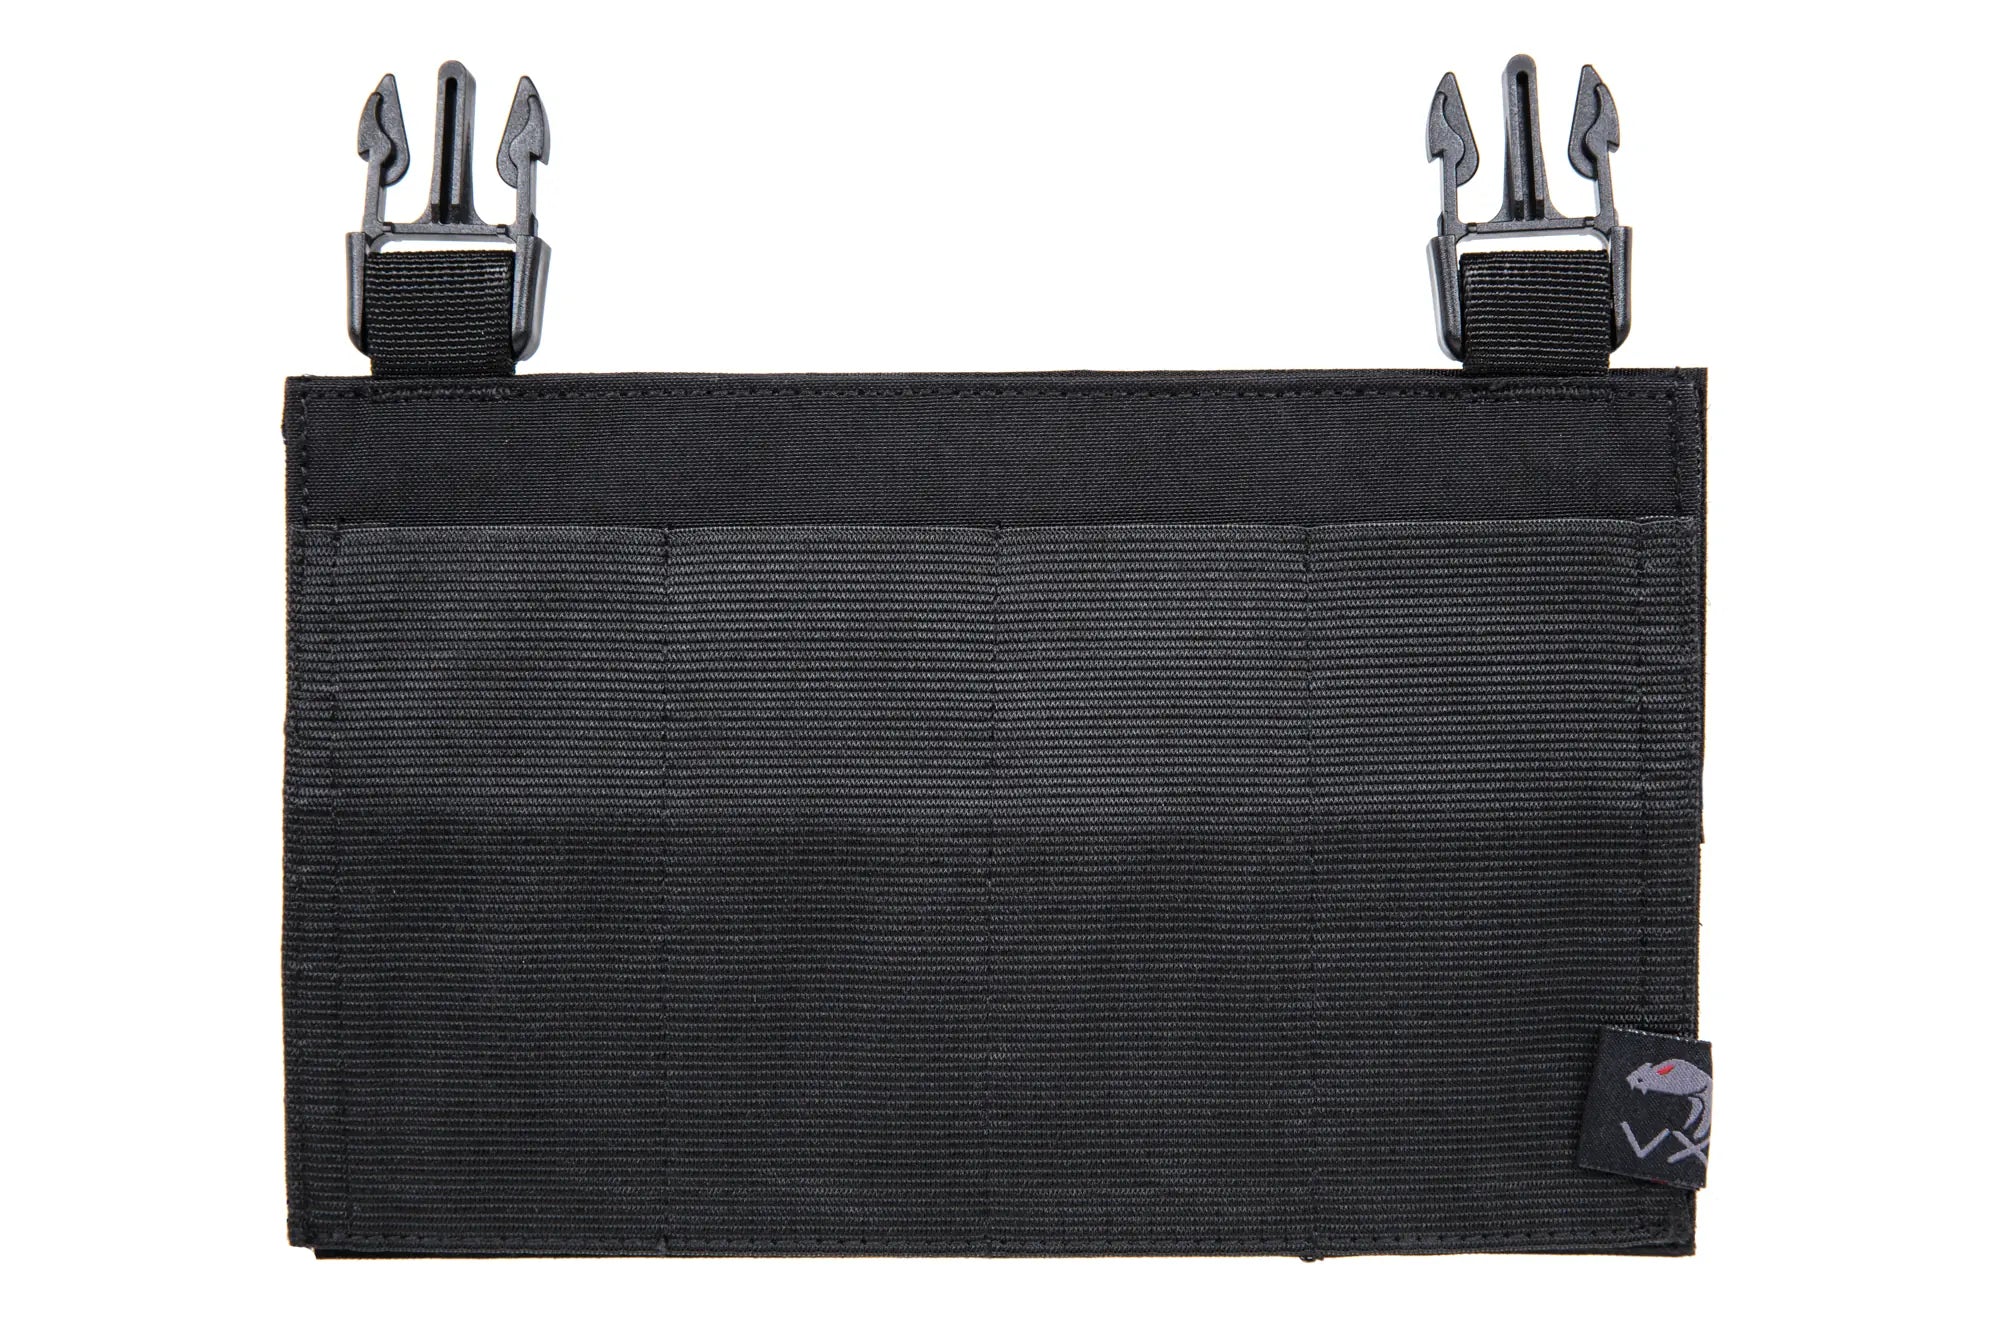 Viper Tactical VX buckle up panel for 4 PM magazines - Black-1